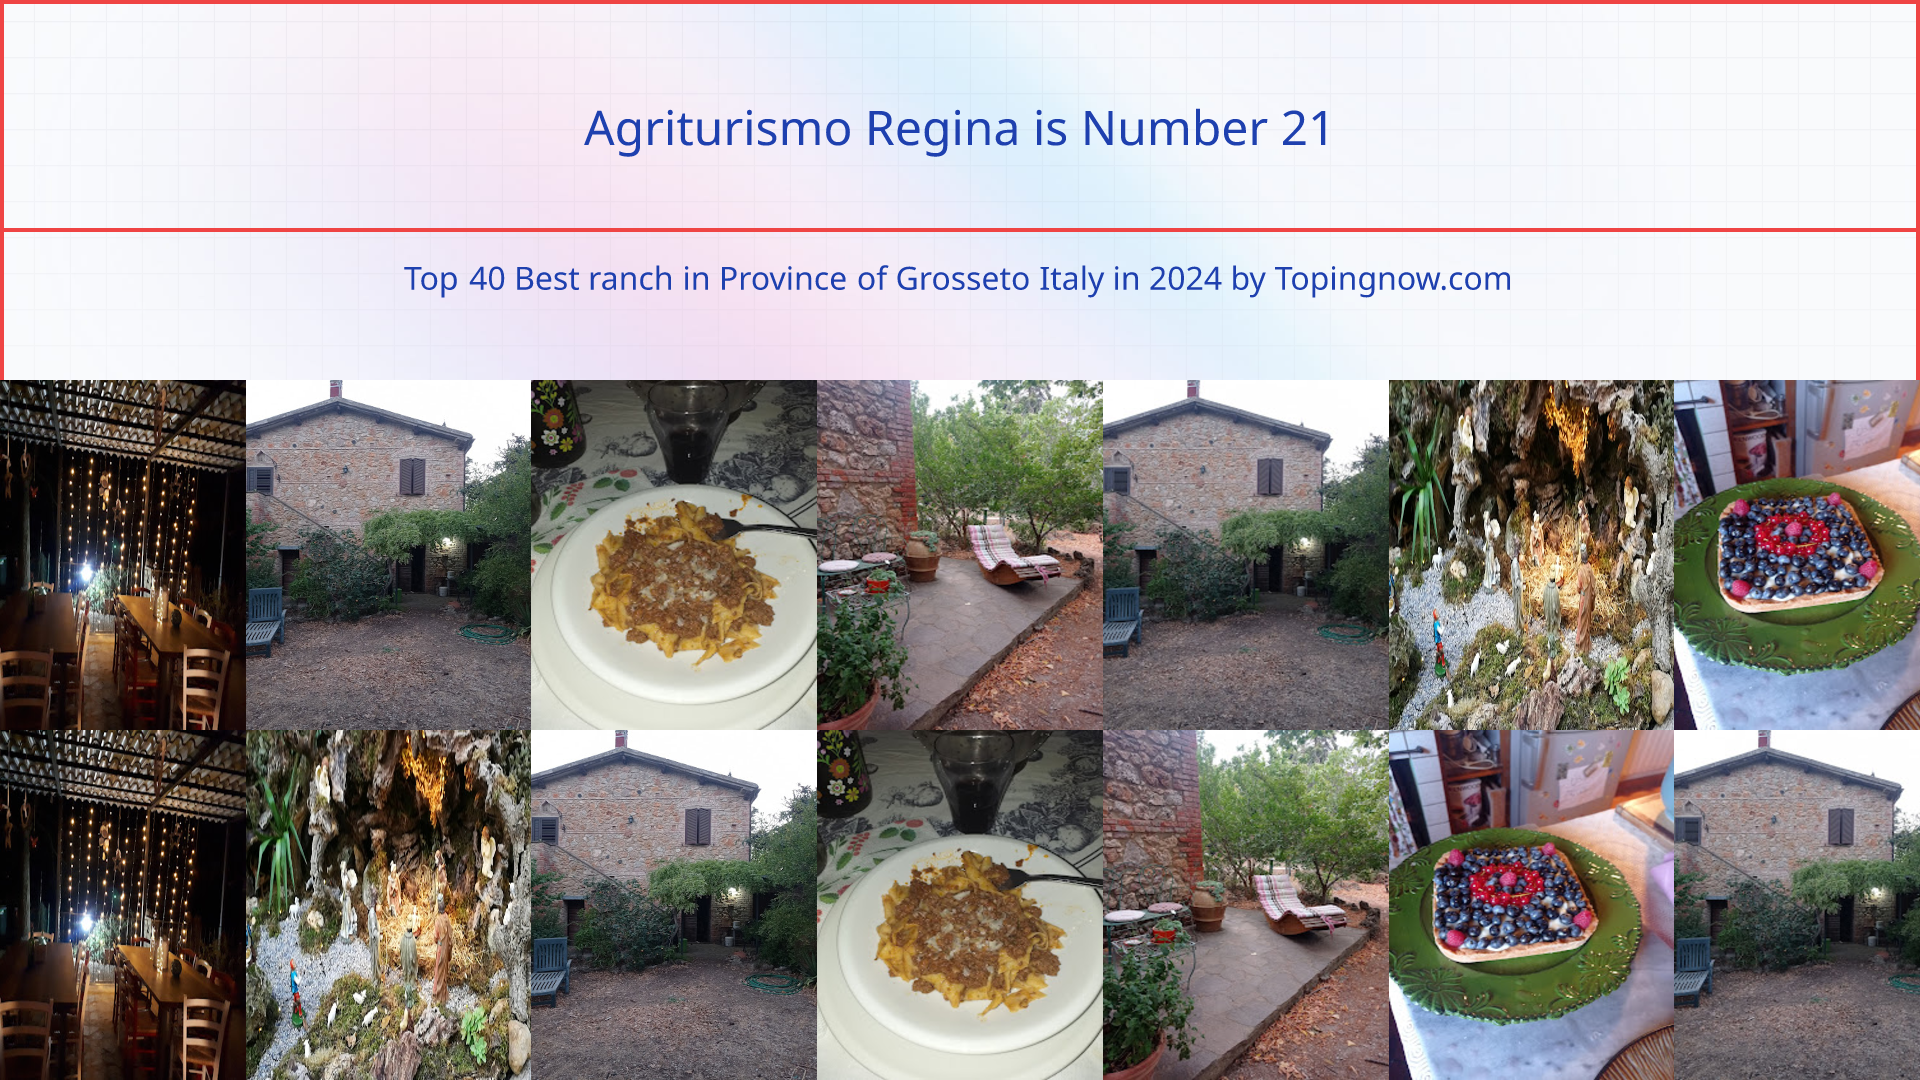 Agriturismo Regina: Top 40 Best ranch in Province of Grosseto Italy in 2024